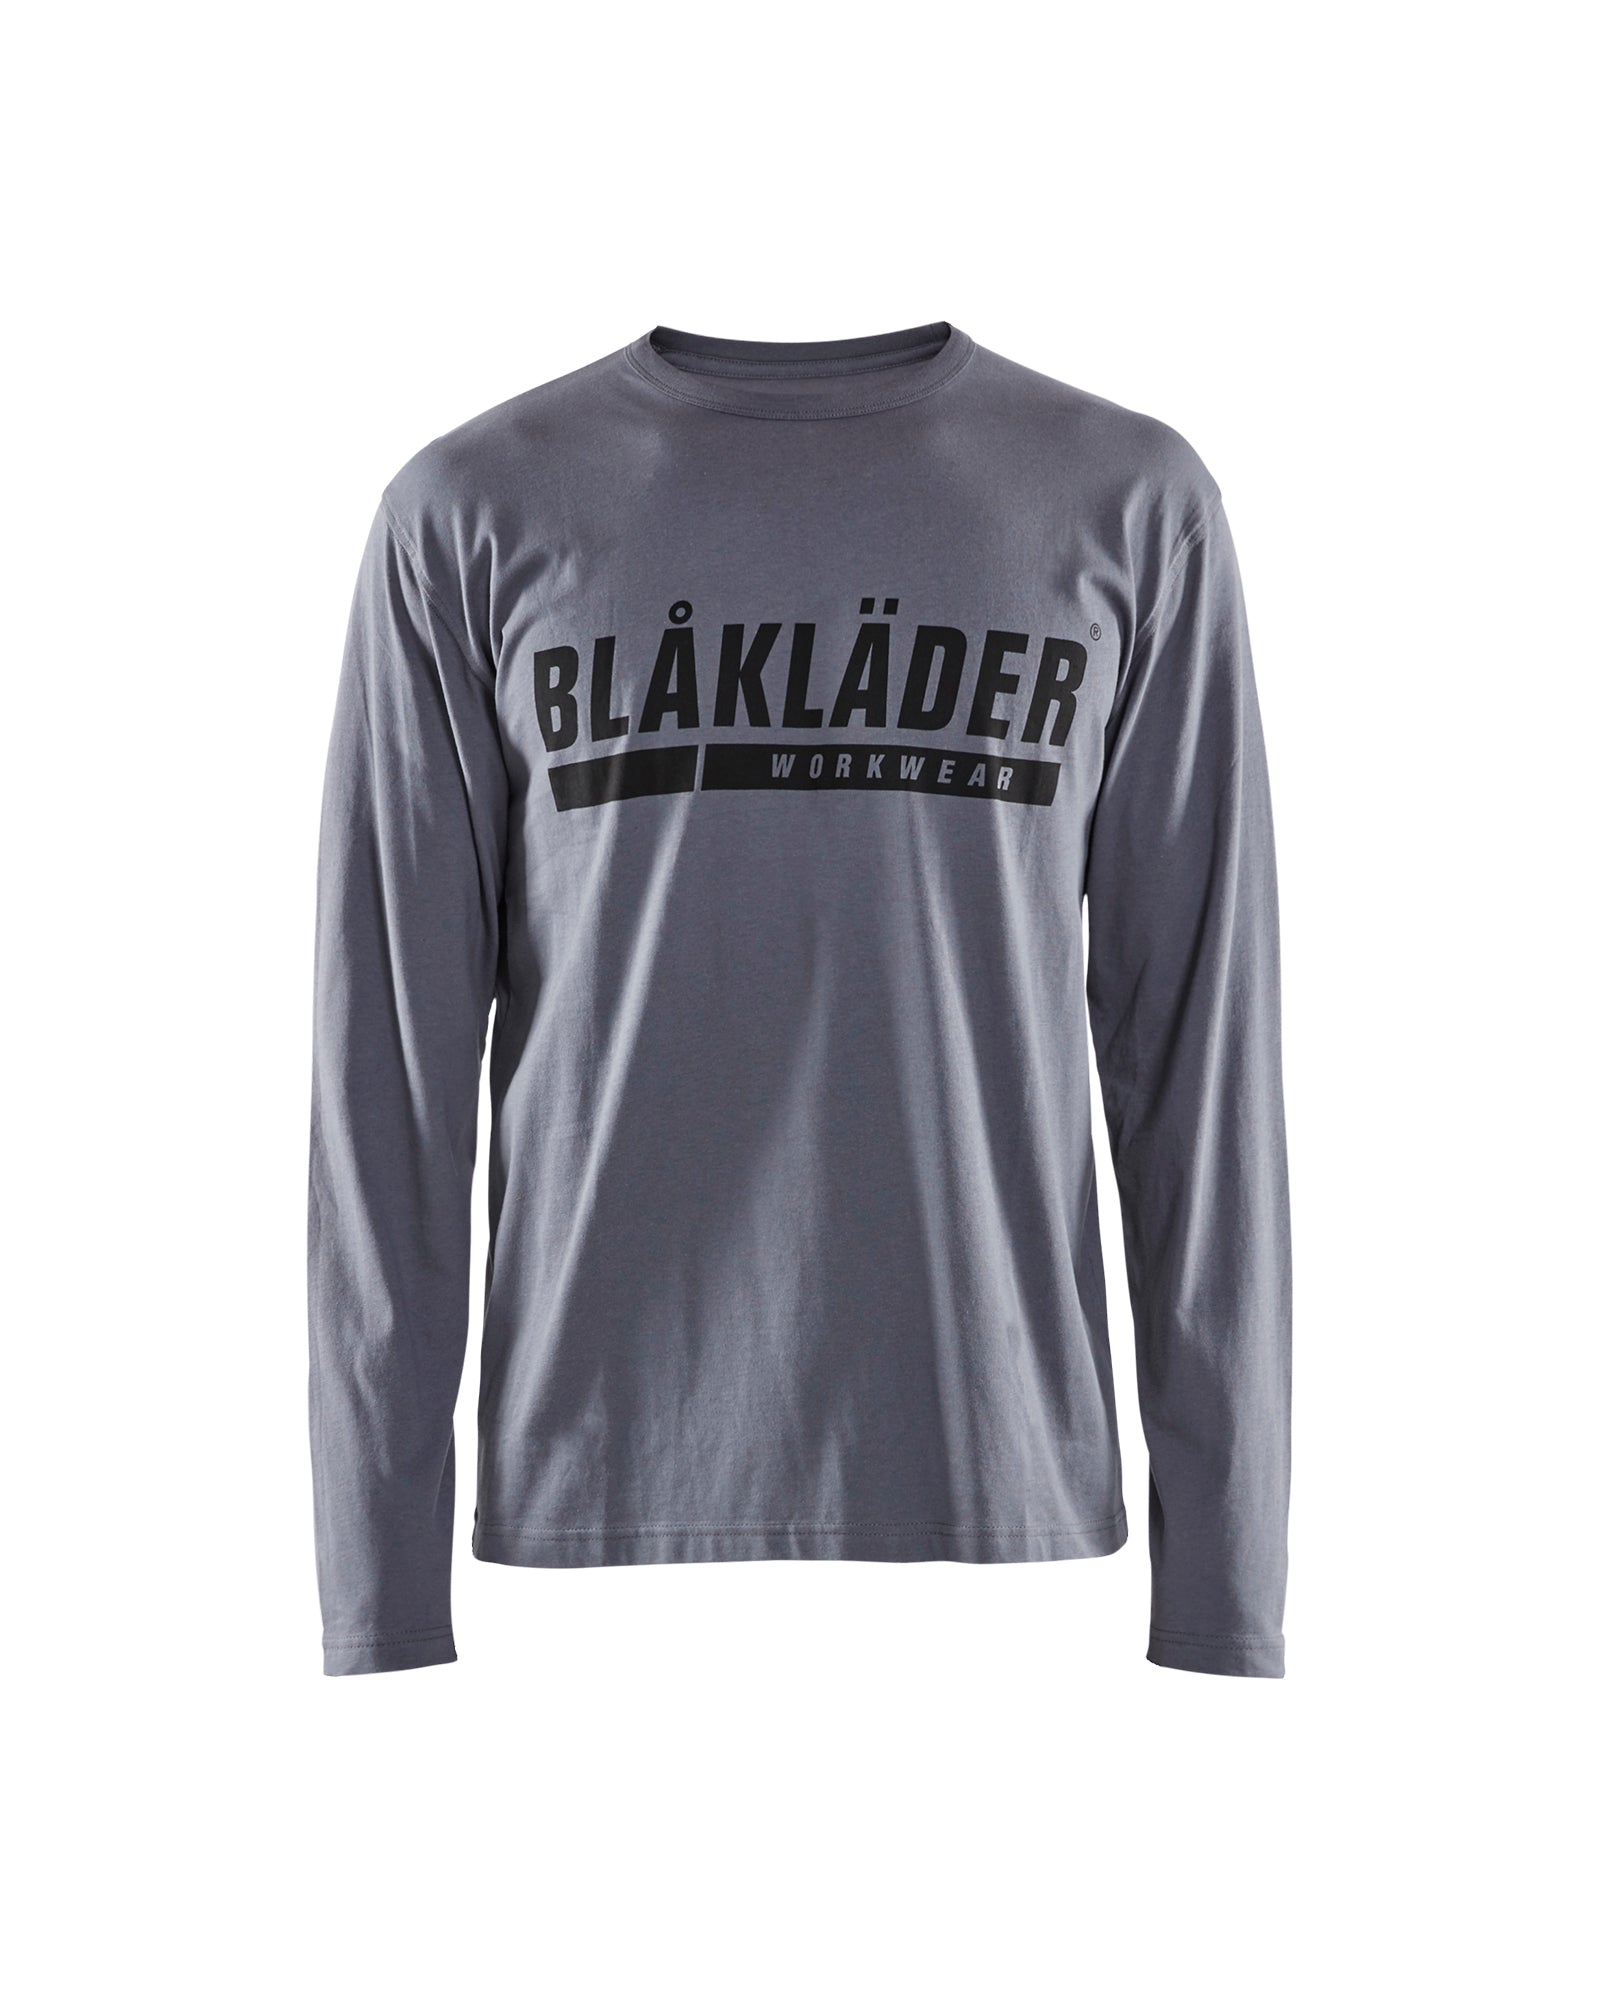 Men's Blaklader US Long Sleeves with Print T-Shirt in Grey from the front view